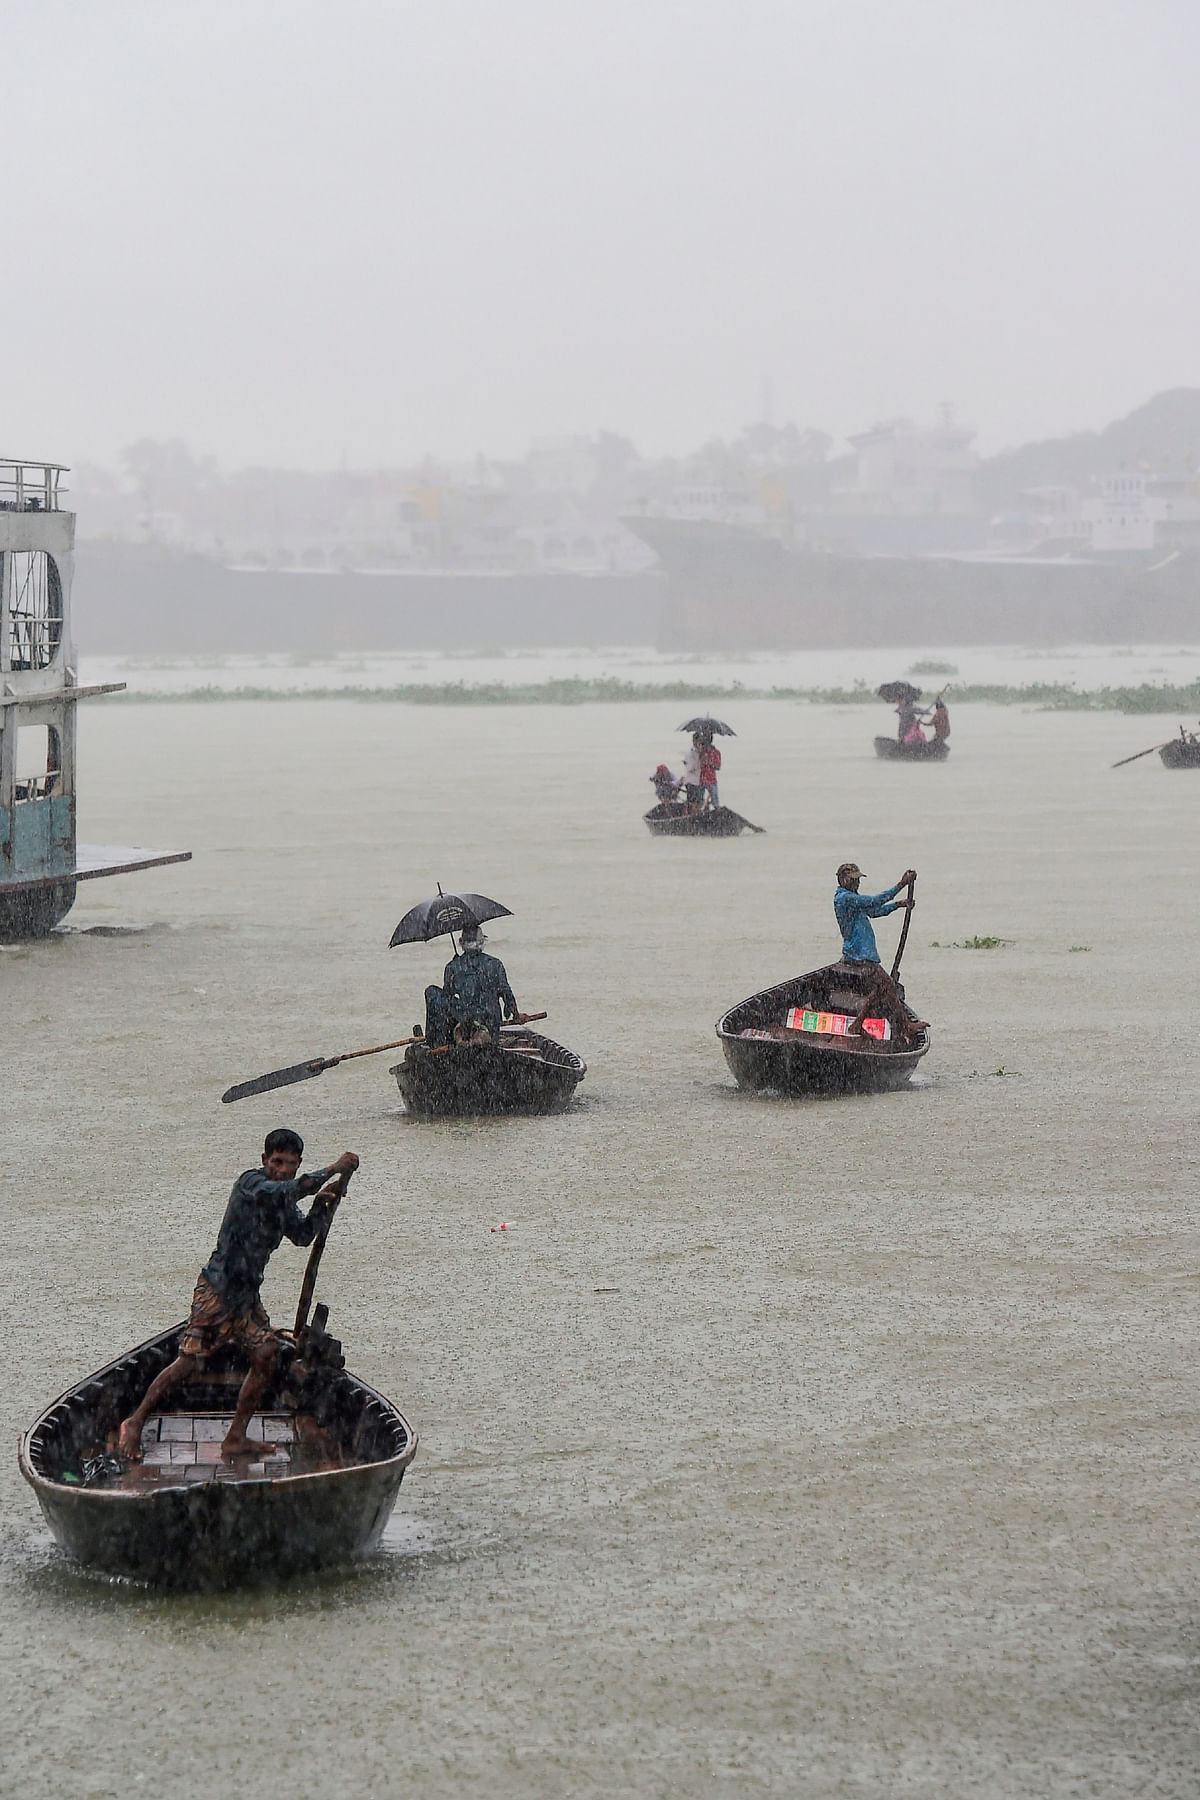 Men ride their boats under heavy rain in Buriganga River in Dhaka on 29 September, 2019. Photo: AFP